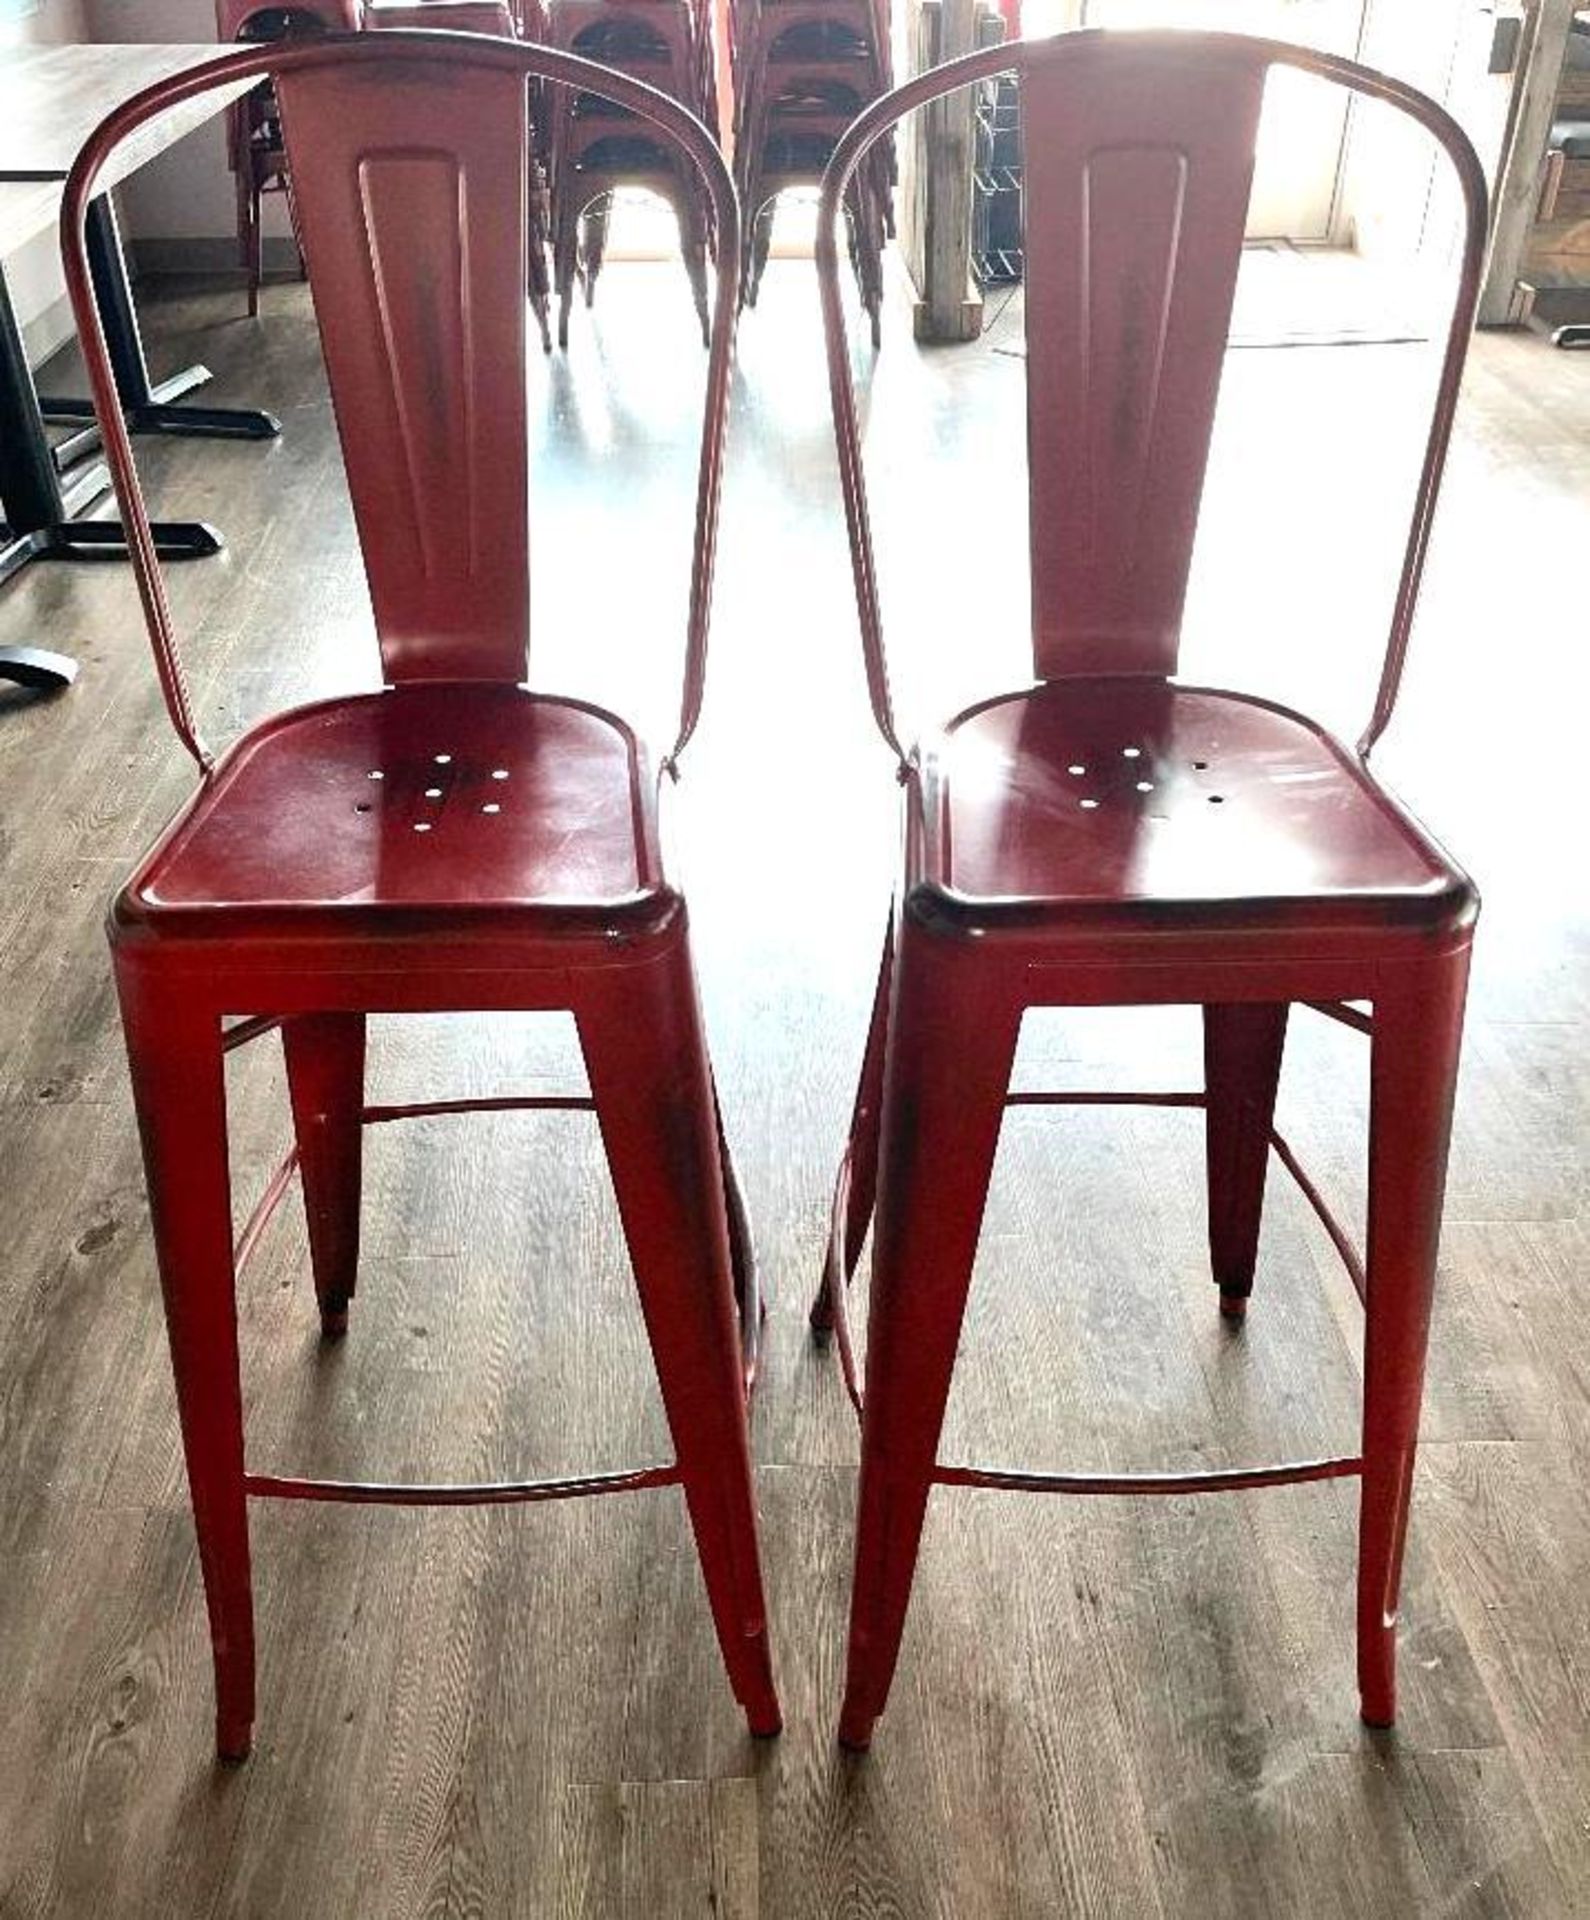 DESCRIPTION: (3) 30" METAL BAR STOOLS ADDITIONAL INFORMATION FADED TABASCO LOCATION: SEATING THIS LO - Image 2 of 3